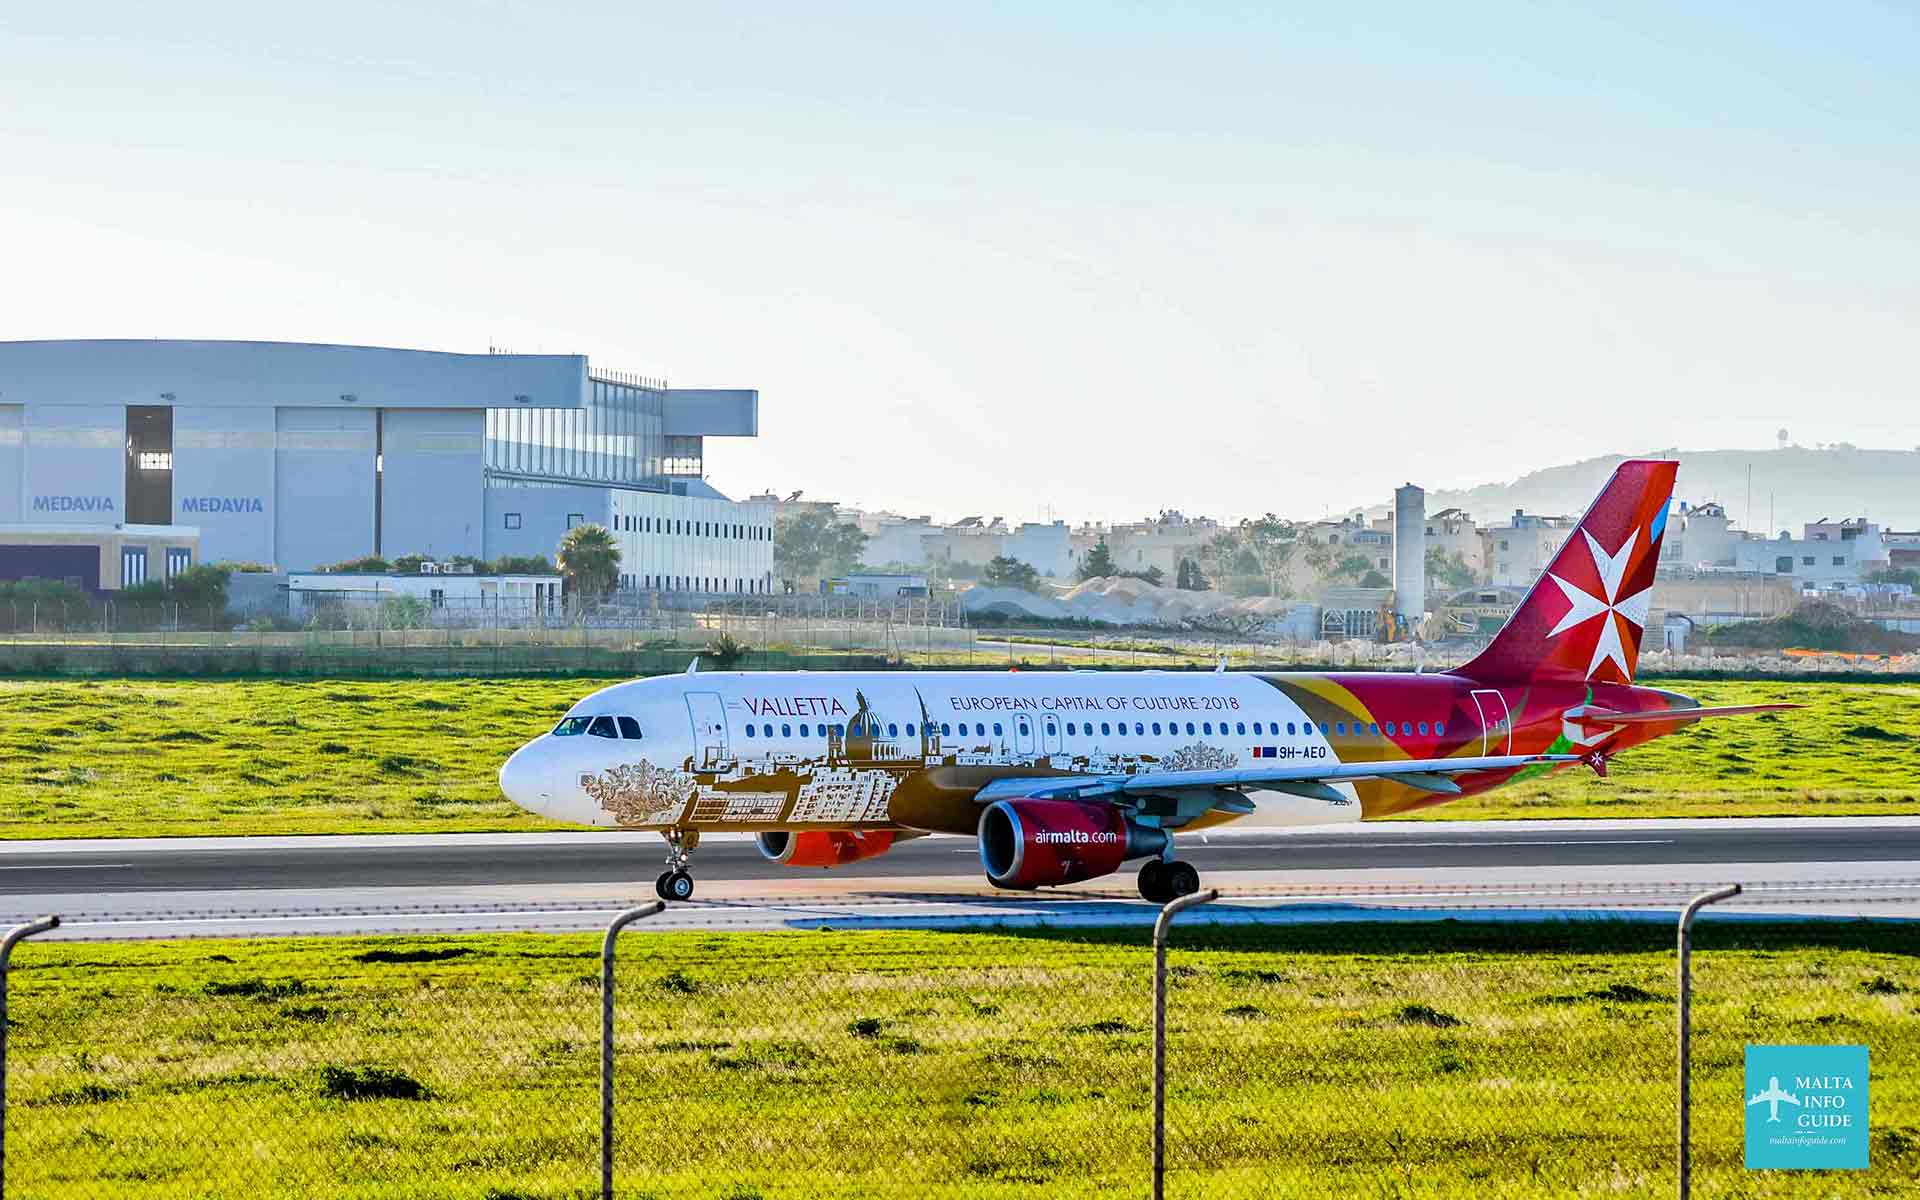 Air Malta on the runway, the airline of the Maltese islands.